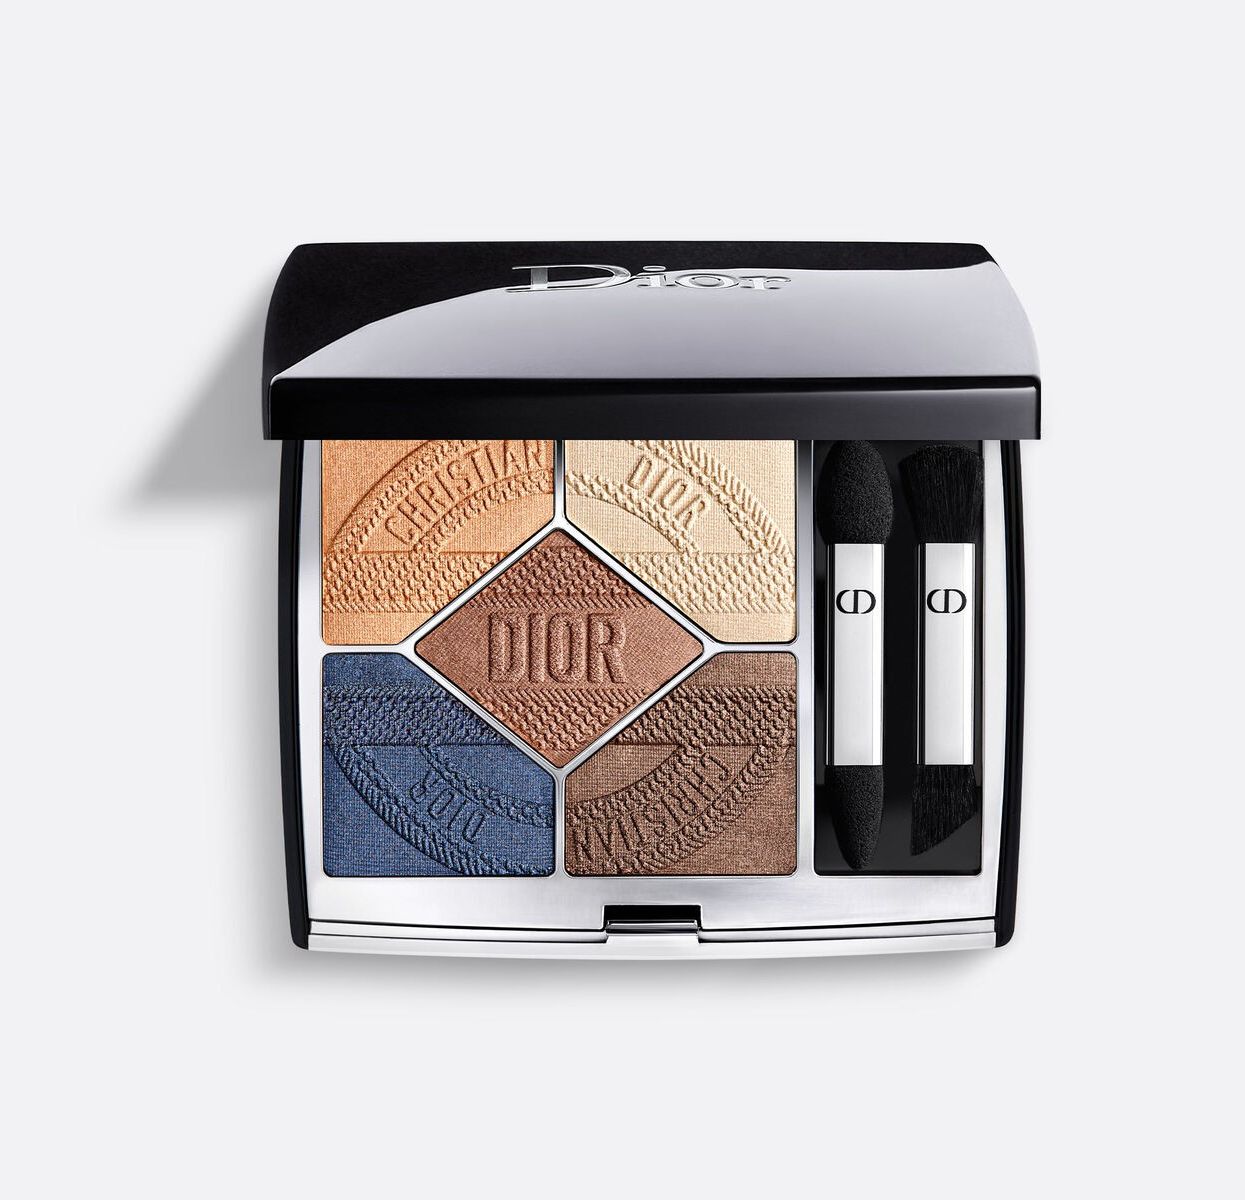 Dior Limited Edition 5 Couleurs Couture Eyeshadow Palette in Eden Roc